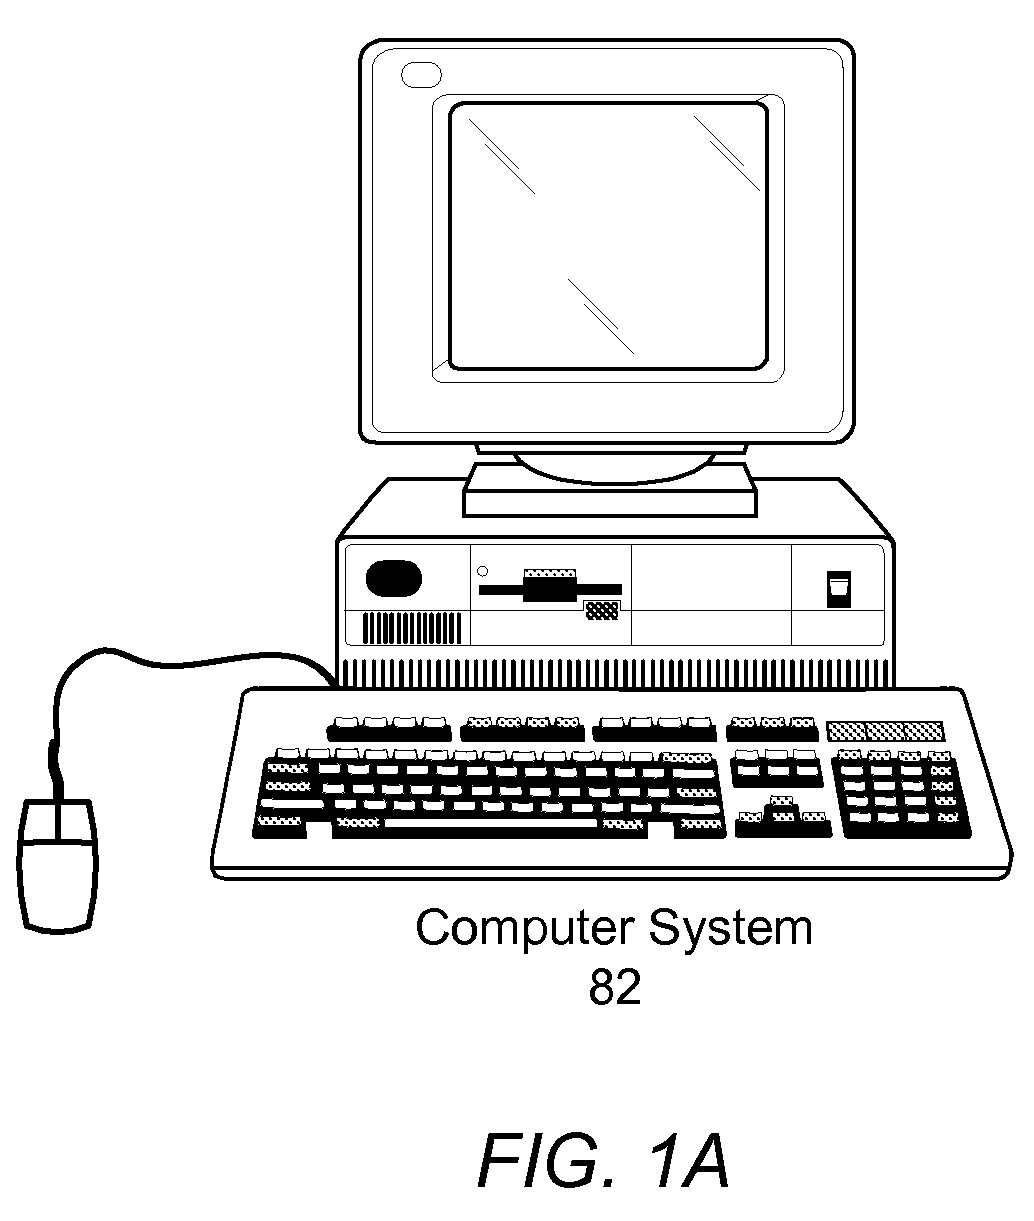 Automatic conversion of text-based code having function overloading and dynamic types into a graphical program for compiled execution